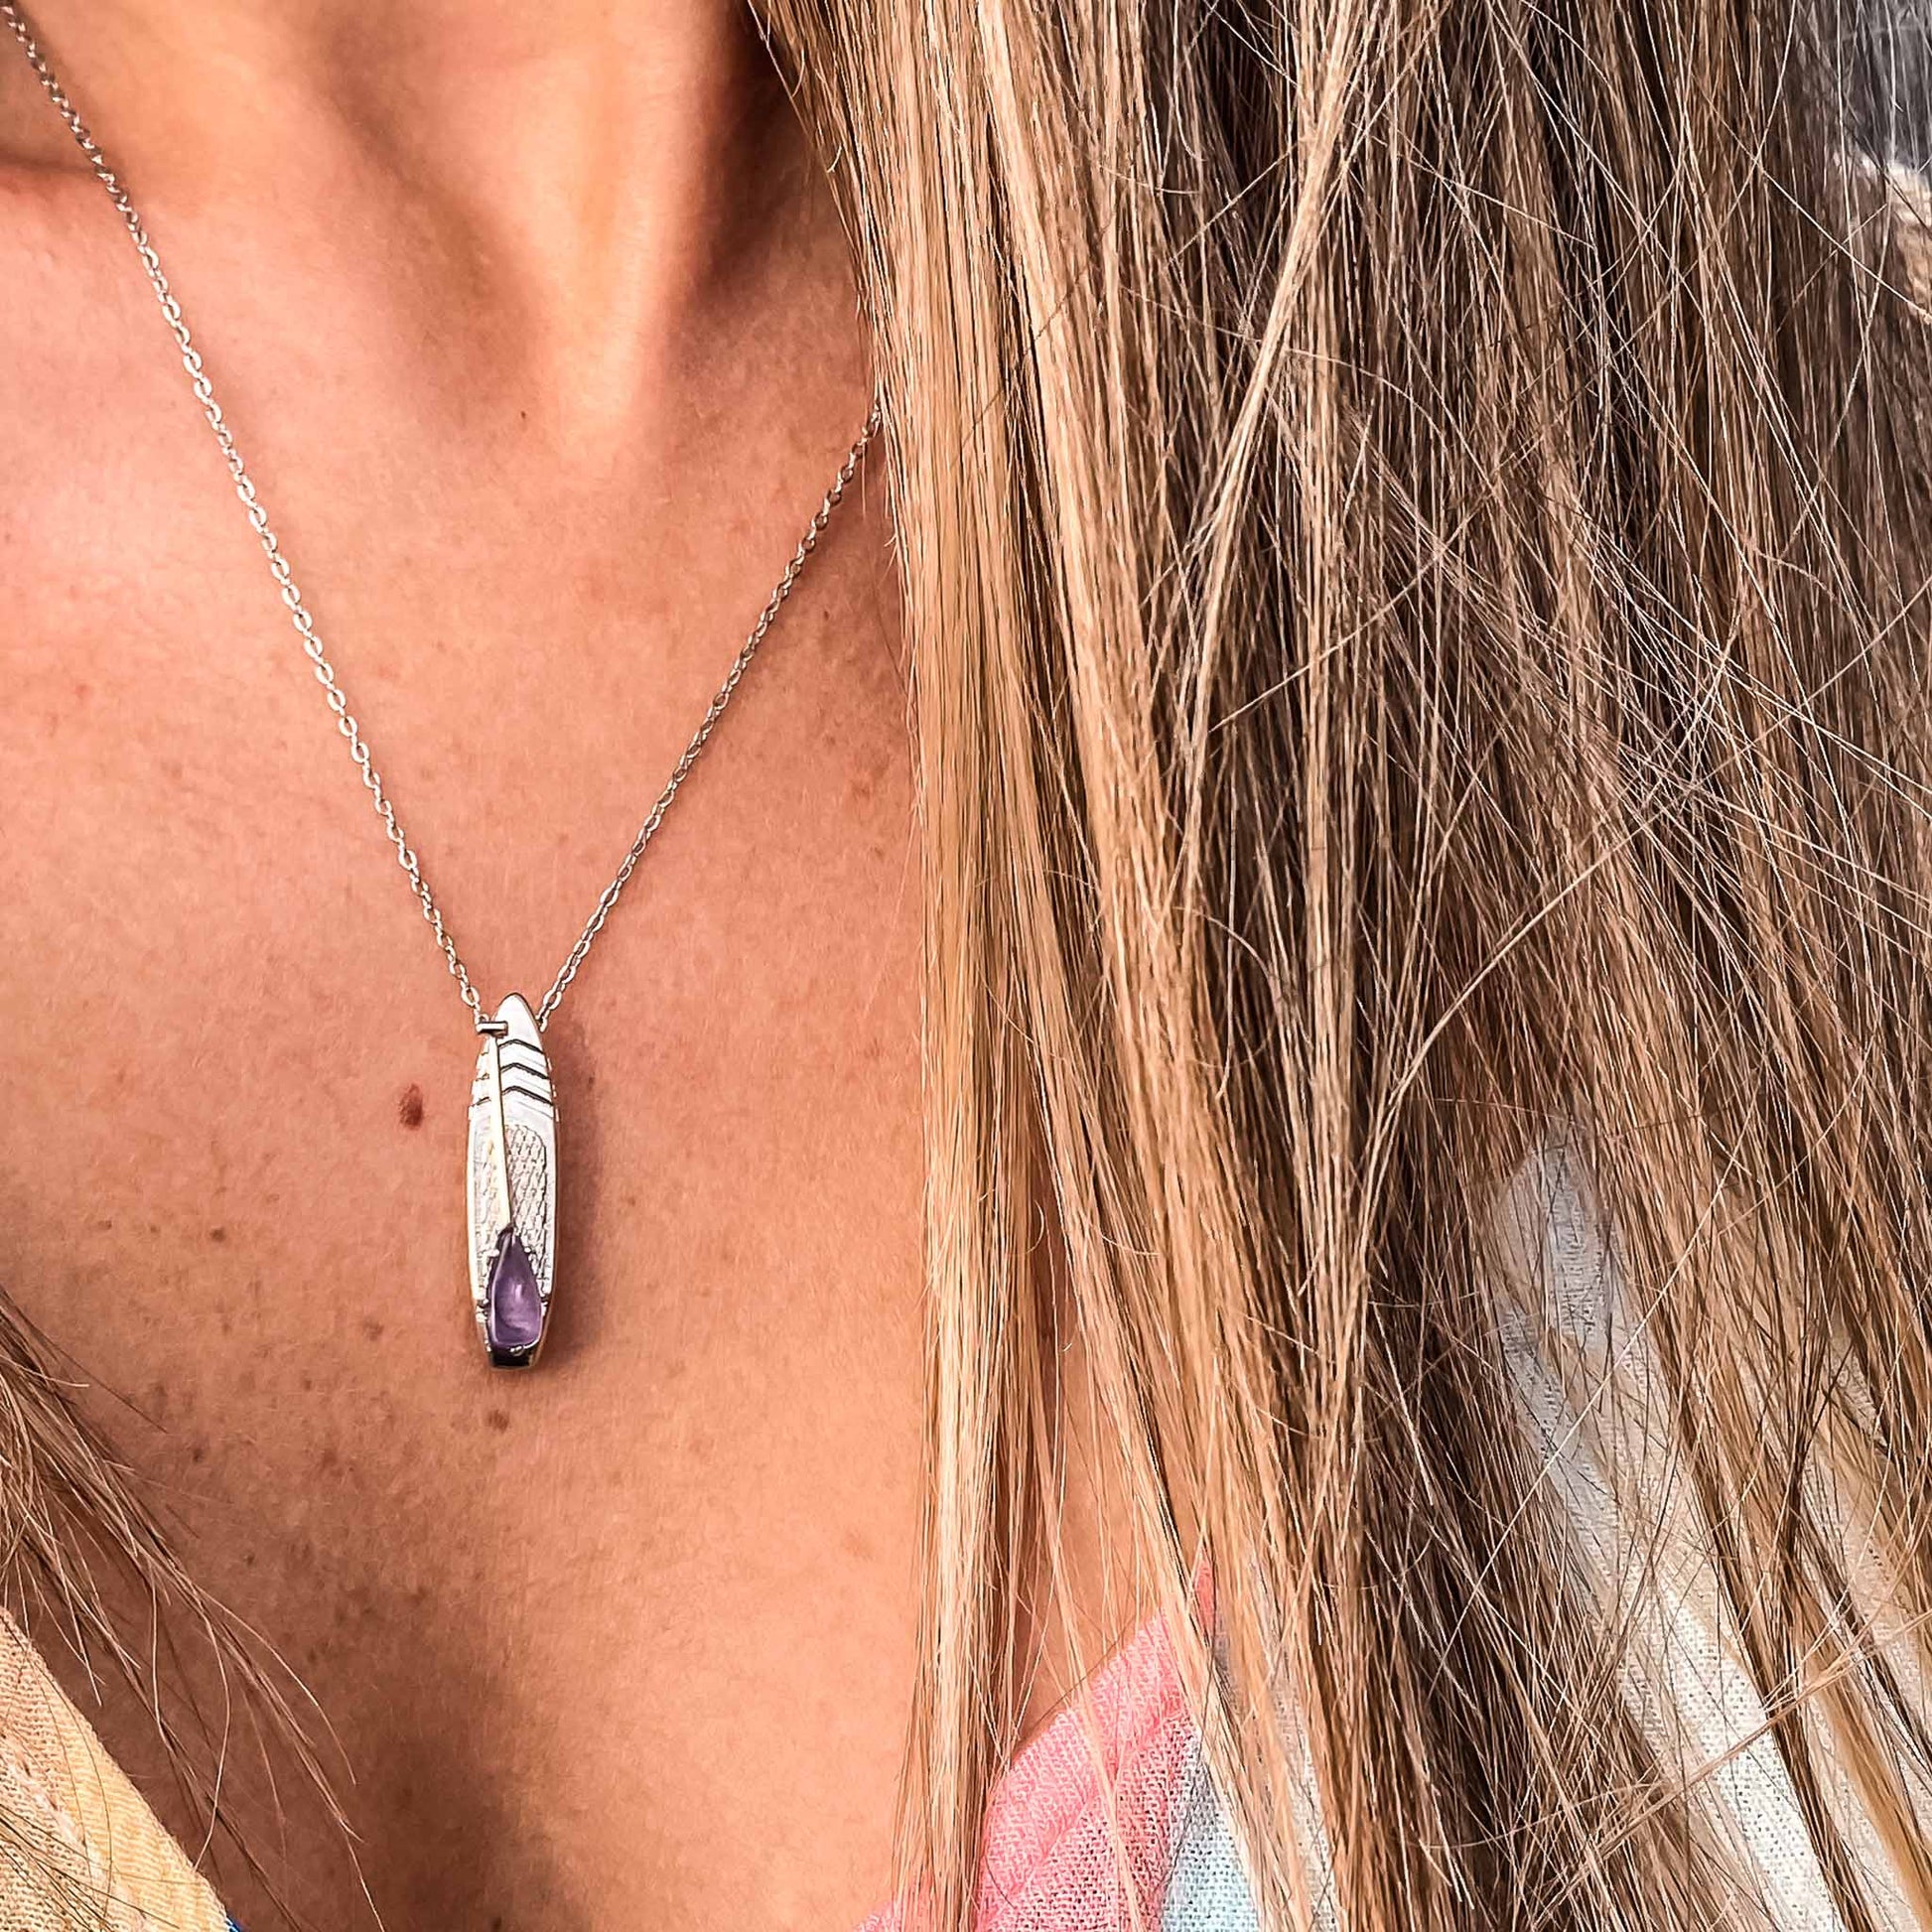 Looking for places to buy or rent a paddle board? This stand up paddle board pendant will be the best and highest performance SUP you'll ever find. Take your paddle board with you, even when you're not surfing, racing or touring. Shop February's birthstone SUP jewelry online or at a surf shop near you.